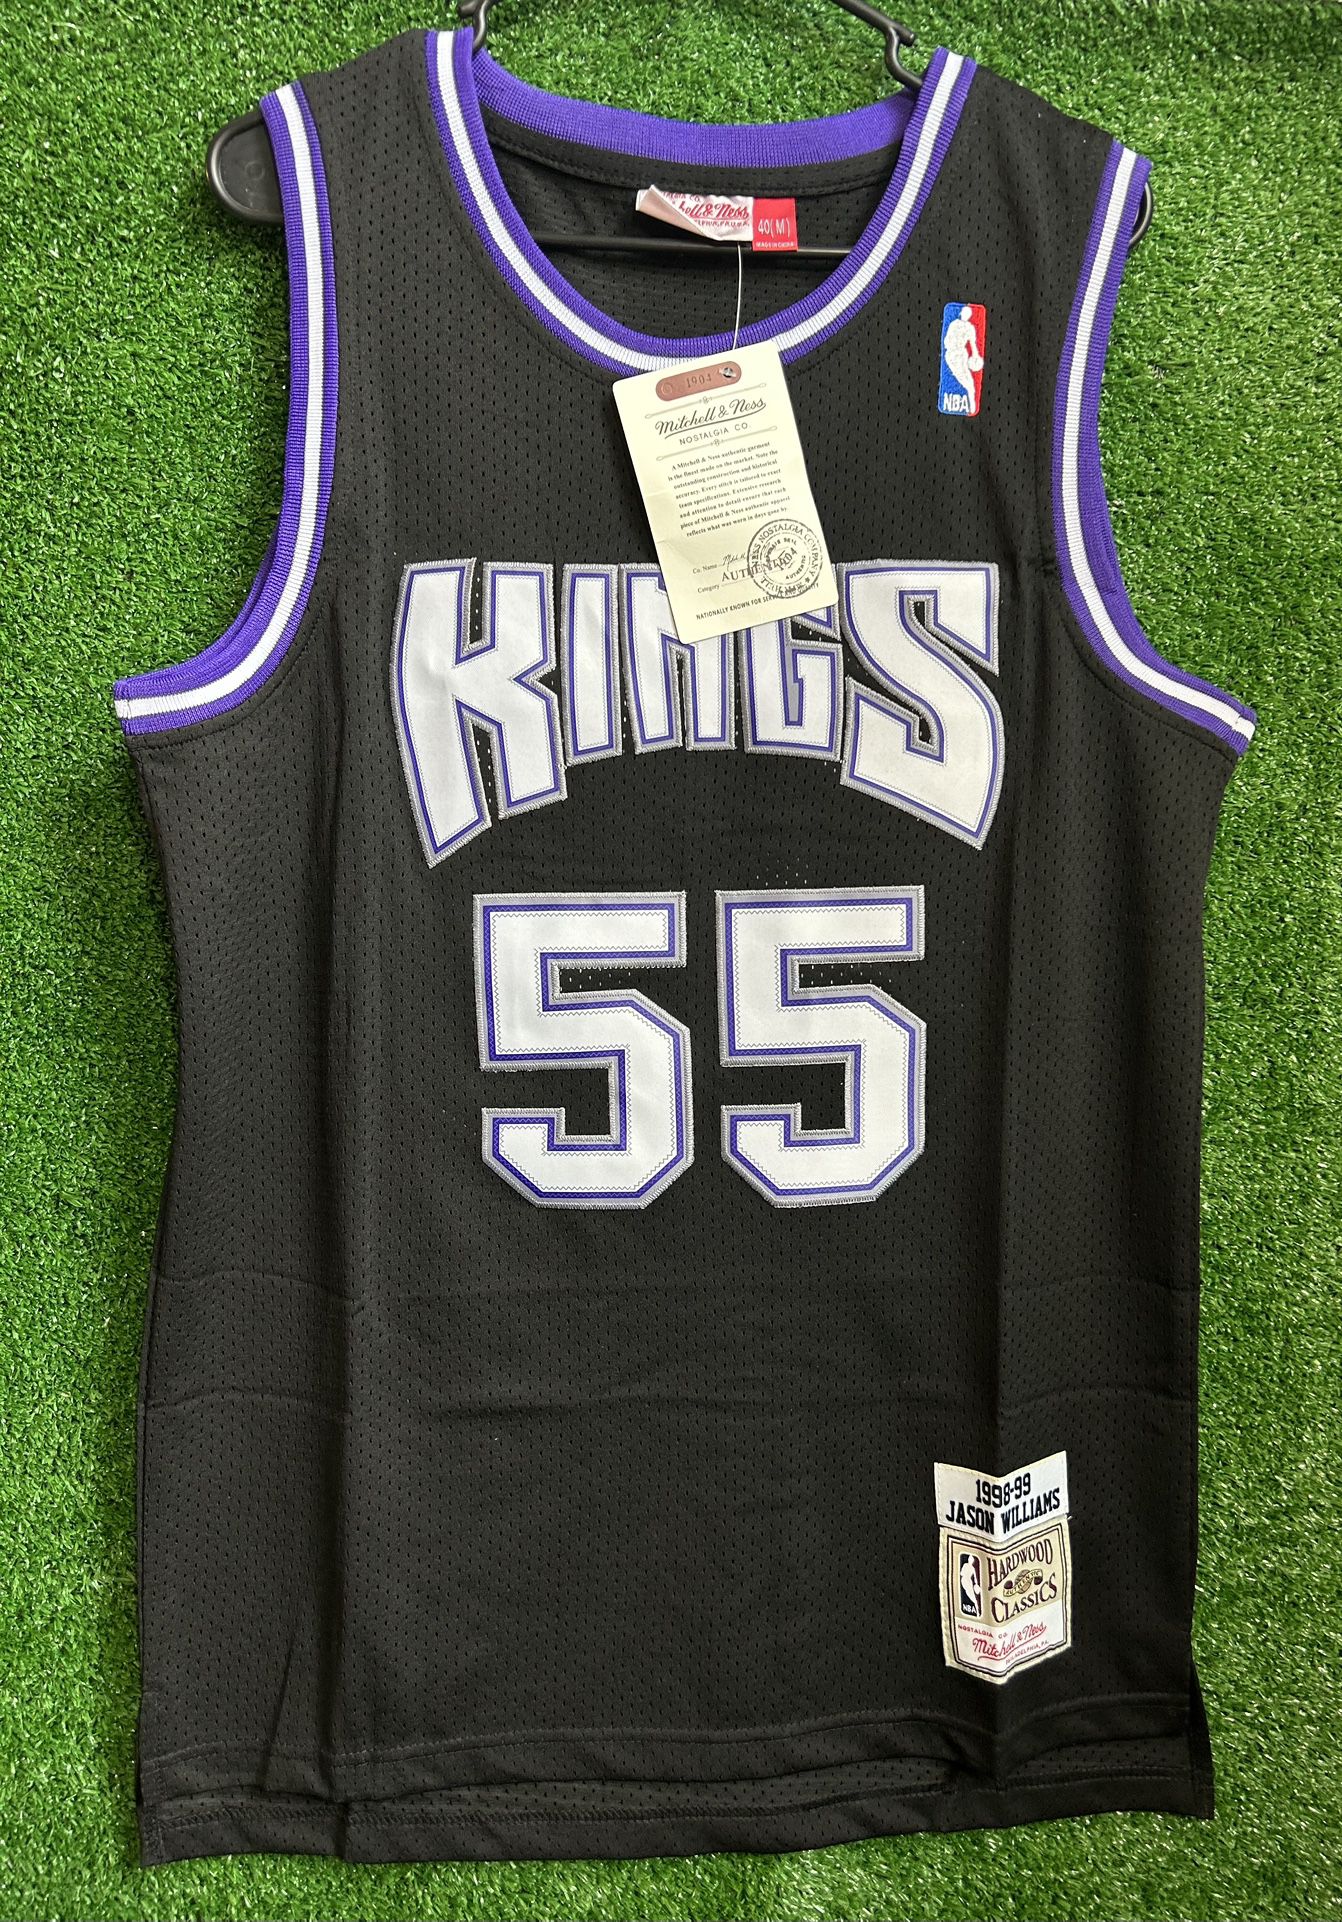 JASON WILLIAMS SACRAMENTO KINGS MITCHELL & NESS JERSEY BRAND NEW WITH TAGS SIZES MEDIUM, LARGE AND XL AVAILABLE